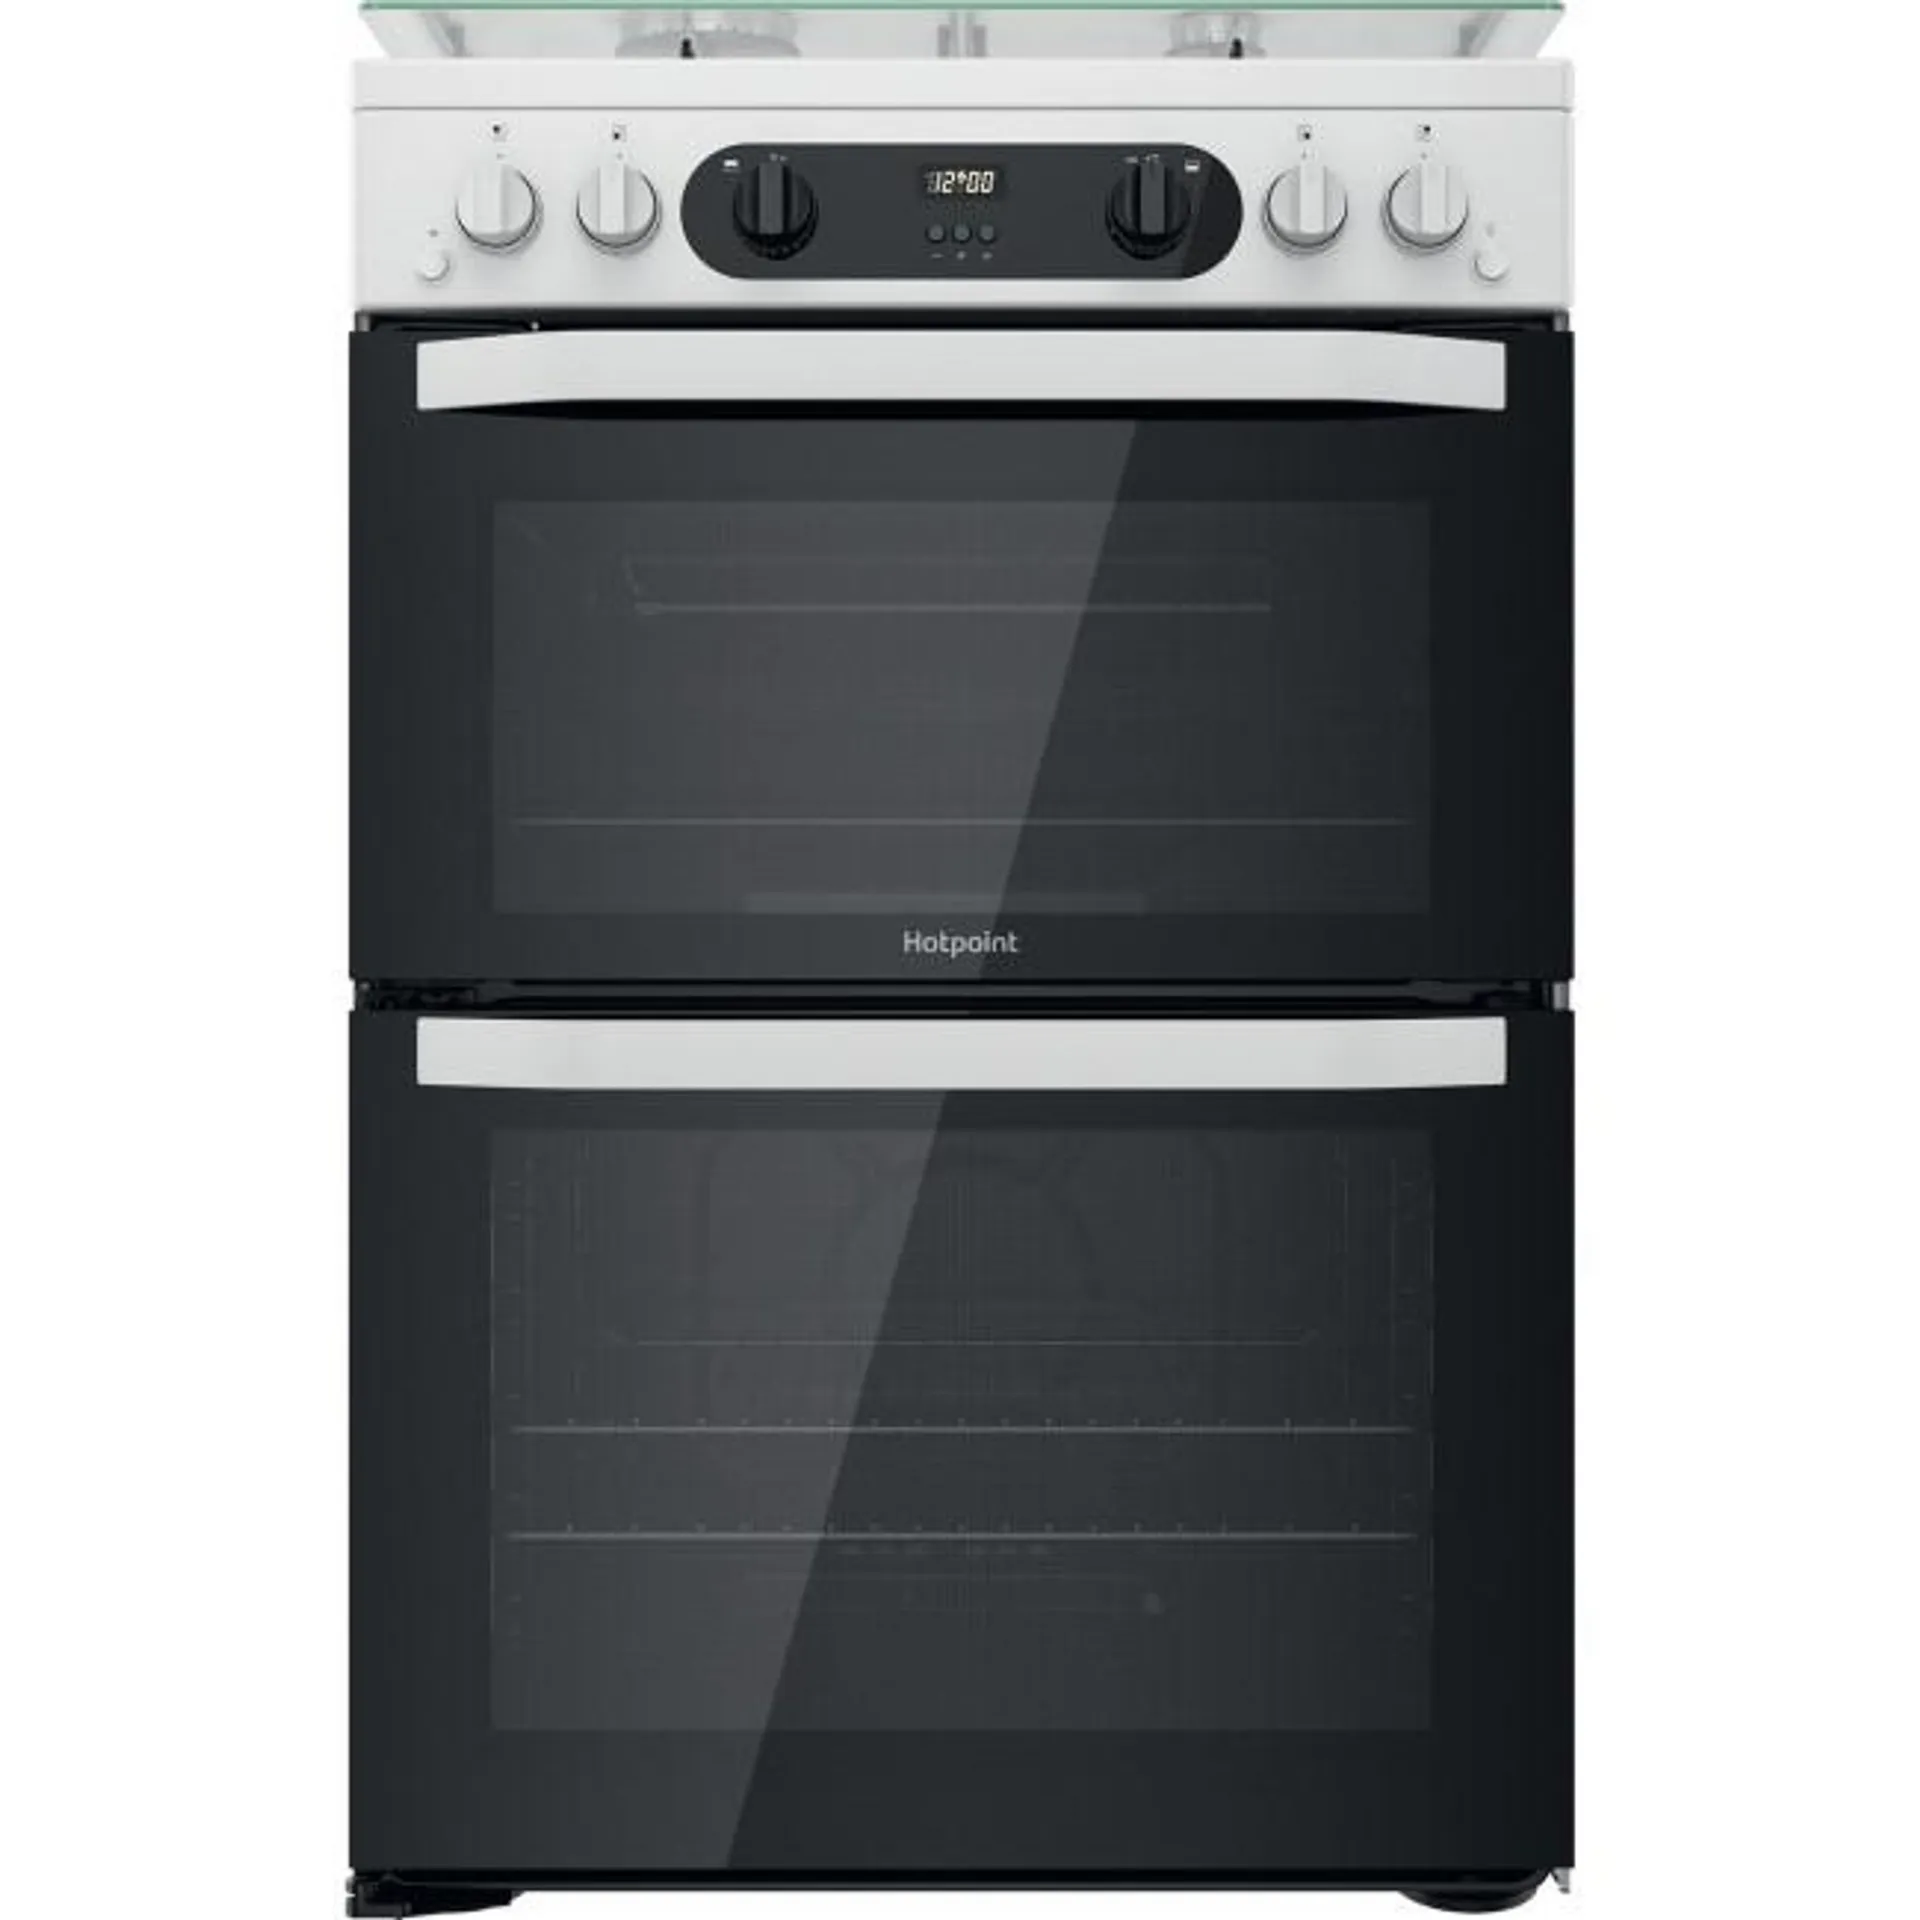 Hotpoint 60cm Double Oven Gas Cooker with Assisted Cleaning and Lid - White